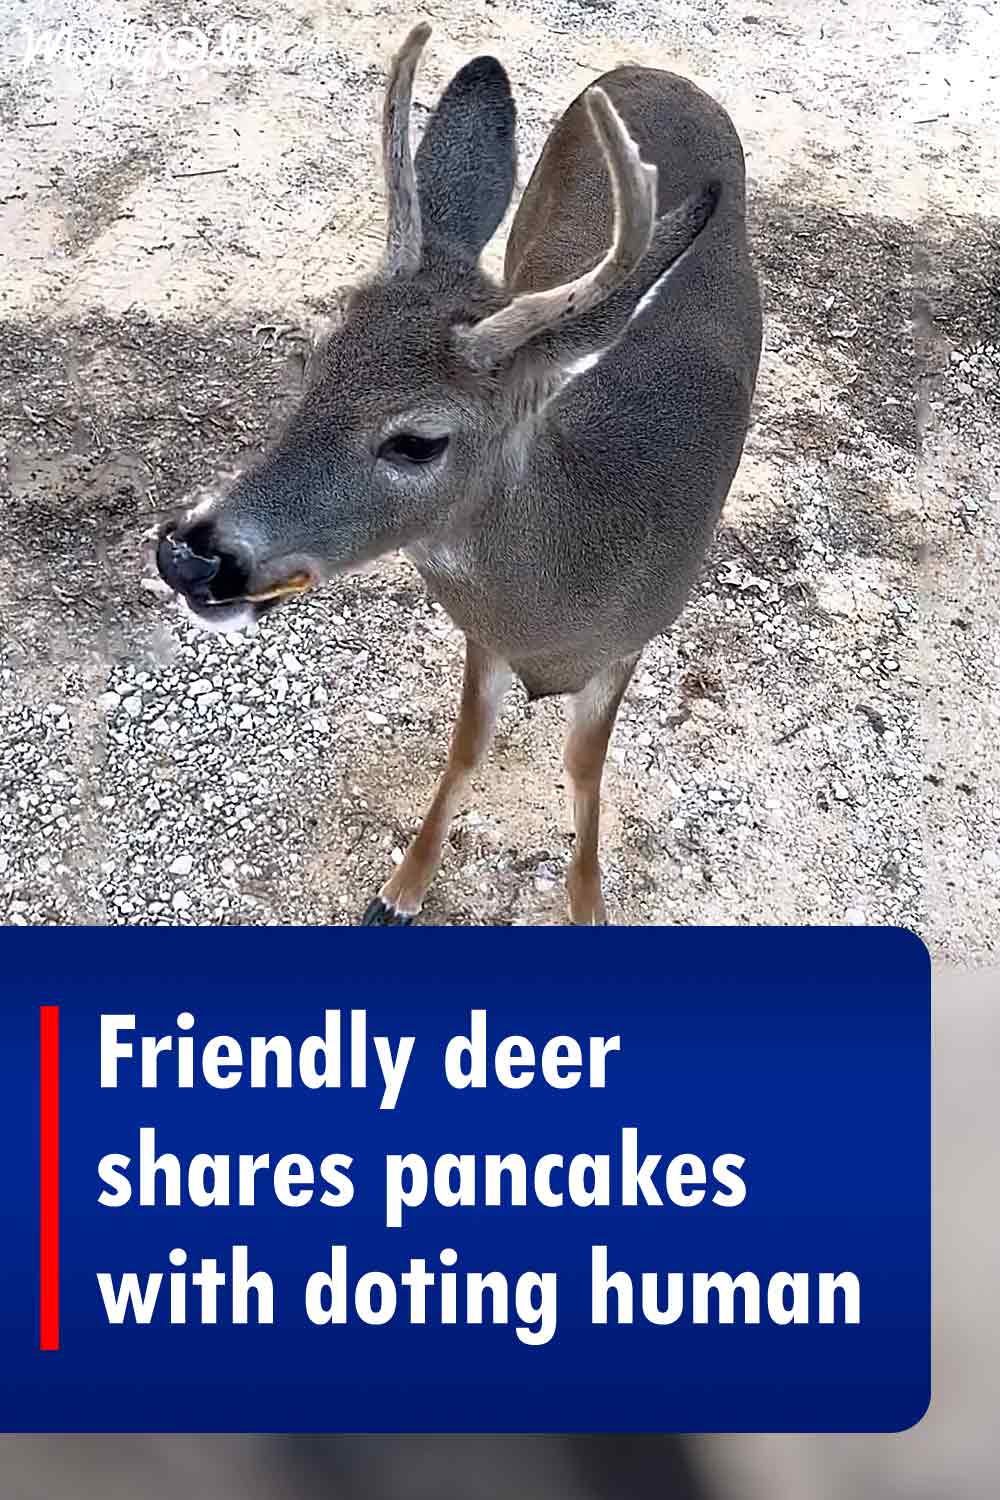 Friendly deer shares pancakes with doting human